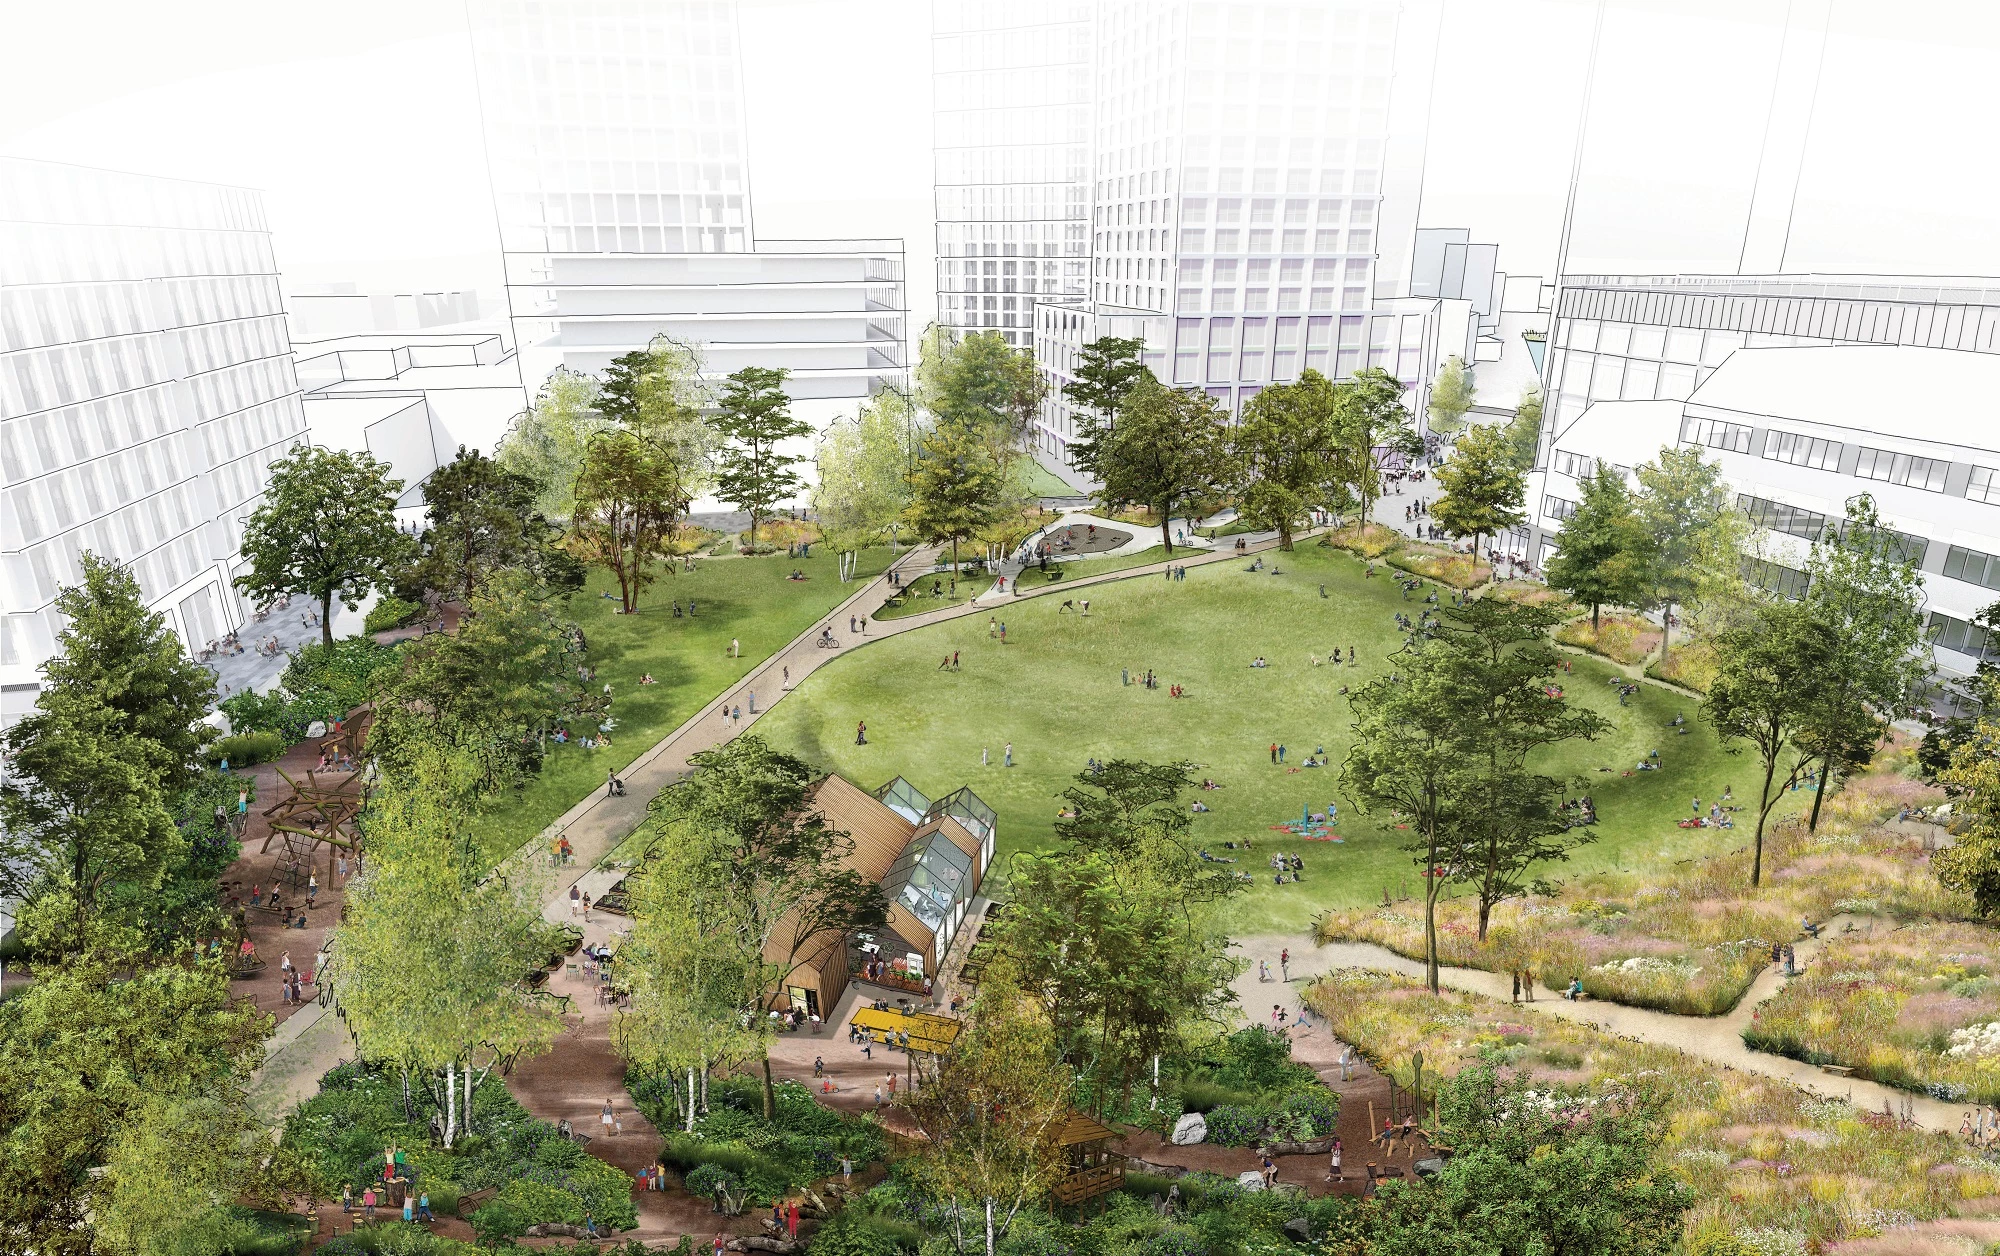 How the scheme's proposed park could look